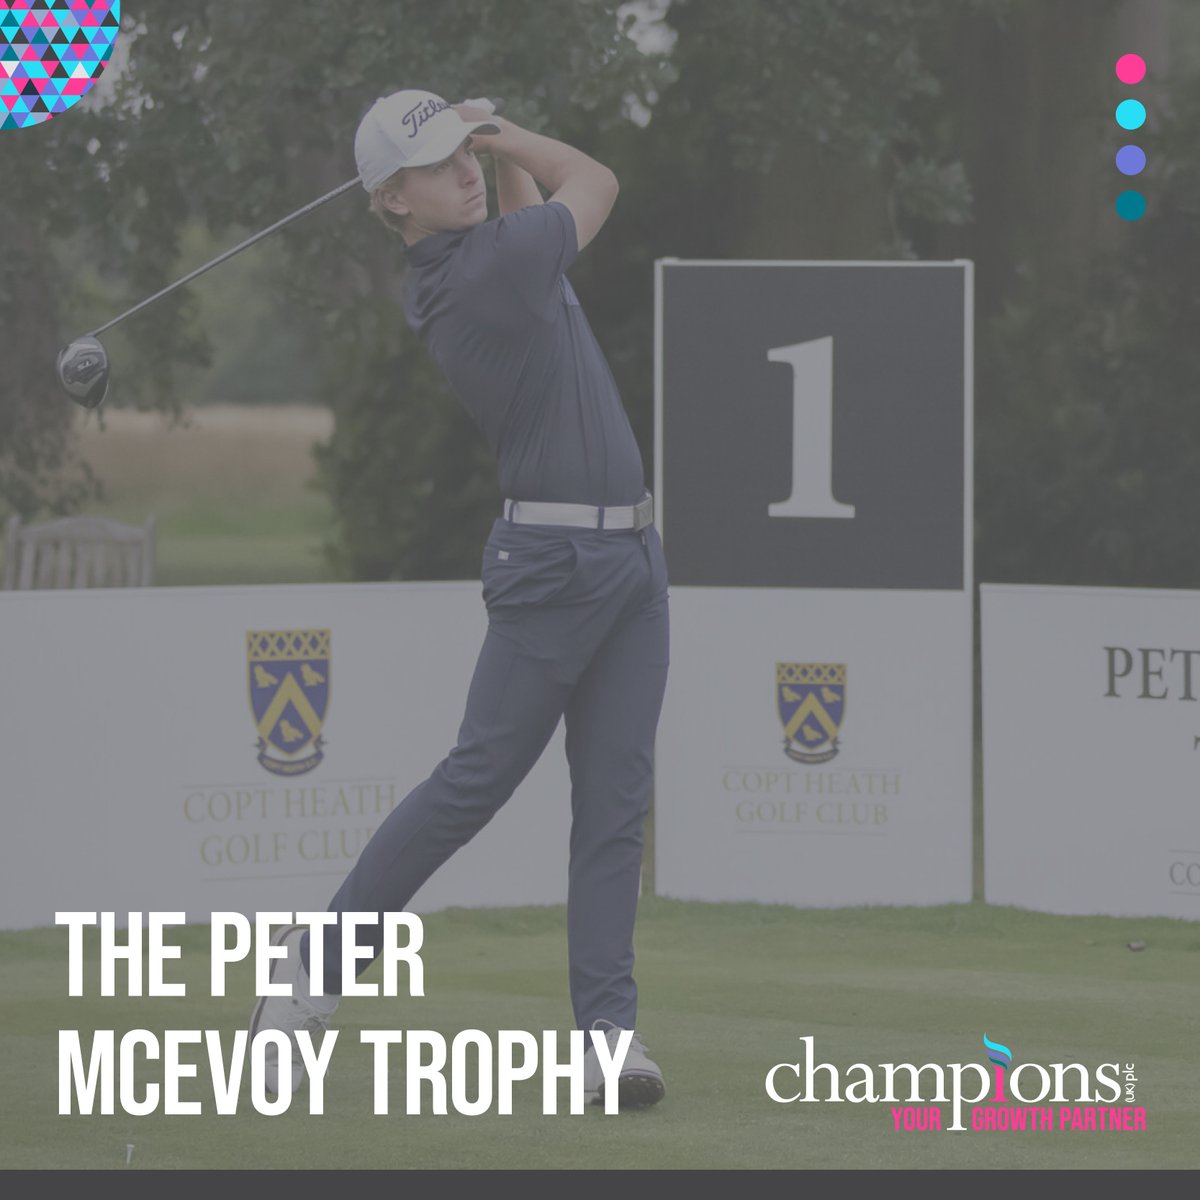 We're five days away from the beginning of one of the most prestigious amateur golf events in the UK: The Peter McEvoy Trophy. The tournament takes place over April 10th - 11th at @CoptHeathGC in Solihull. Visit their page to find out more: bit.ly/3PNWjNG #Golf #UK